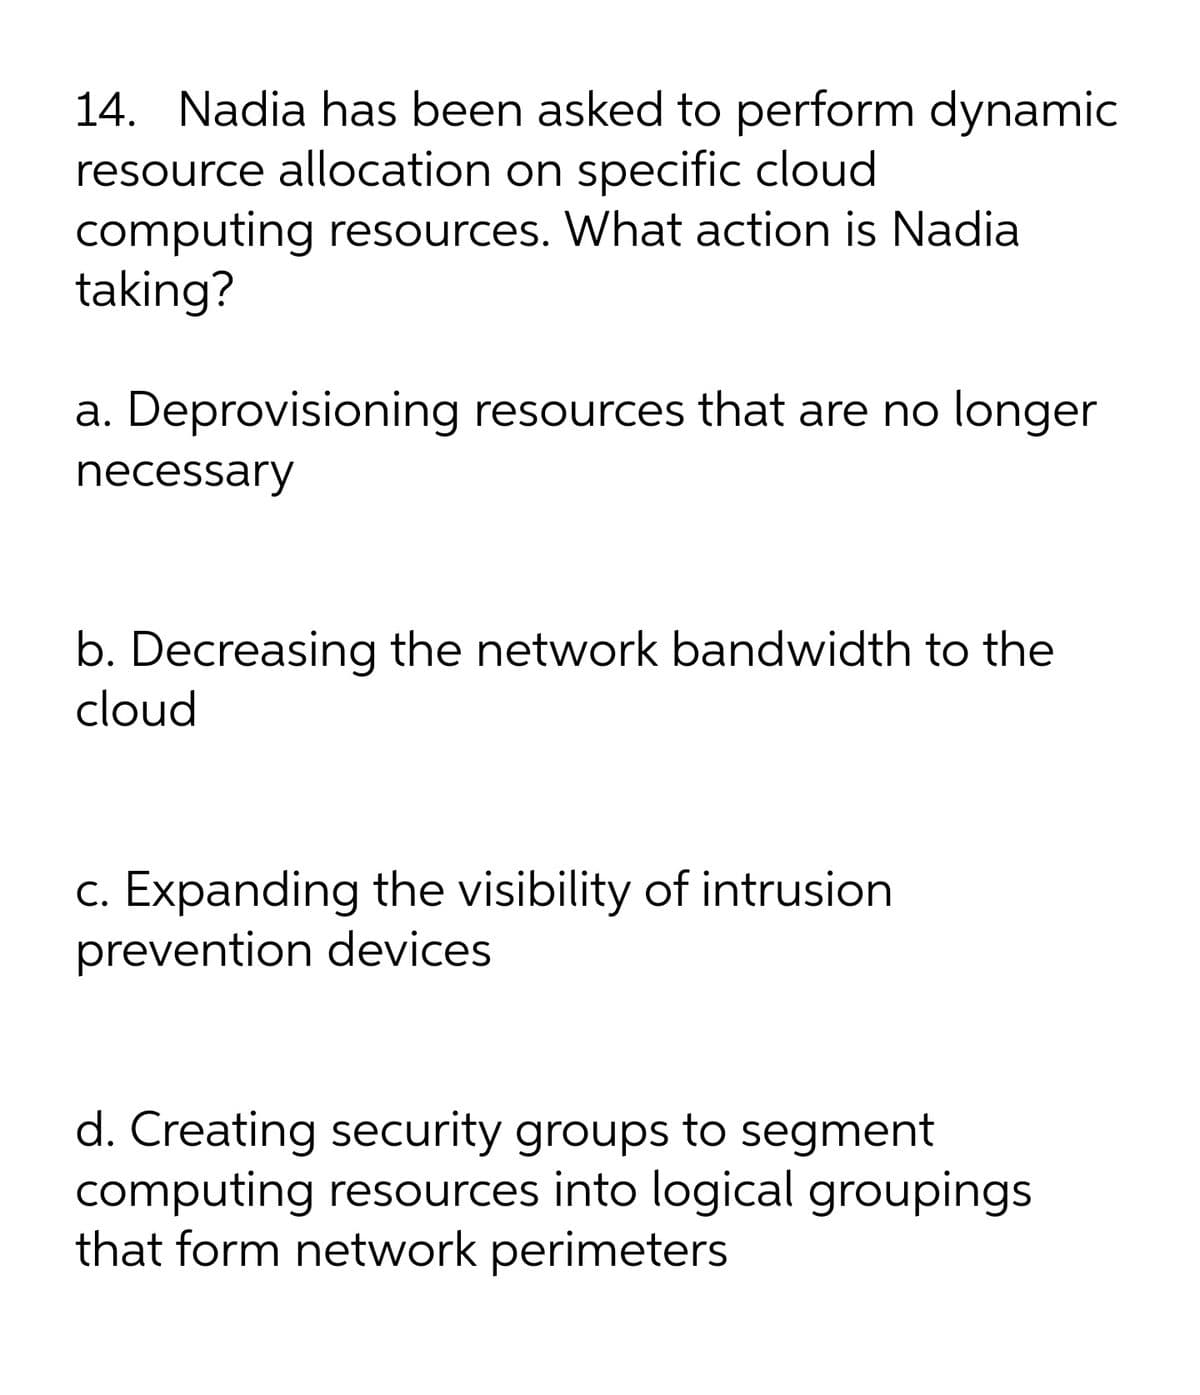 14. Nadia has been asked to perform dynamic
resource allocation on specific cloud
computing resources. What action is Nadia
taking?
a. Deprovisioning resources that are no longer
necessary
b. Decreasing the network bandwidth to the
cloud
c. Expanding the visibility of intrusion
prevention devices
d. Creating security groups to segment
computing resources into logical groupings
that form network perimeters
